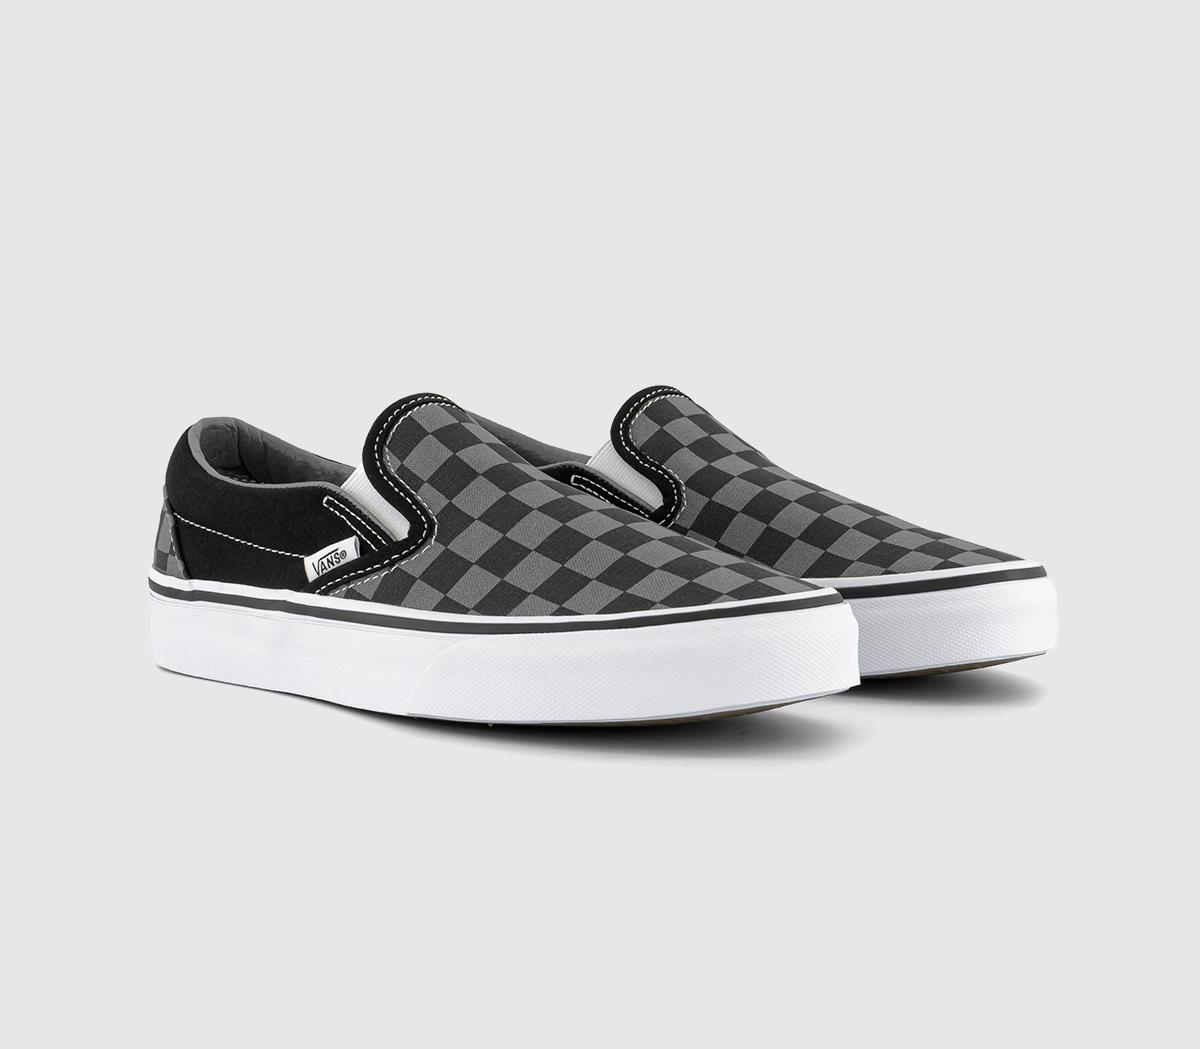 Vans Classic Slip On Trainers Black Pewter Check Canvas In / Grey, 4.5